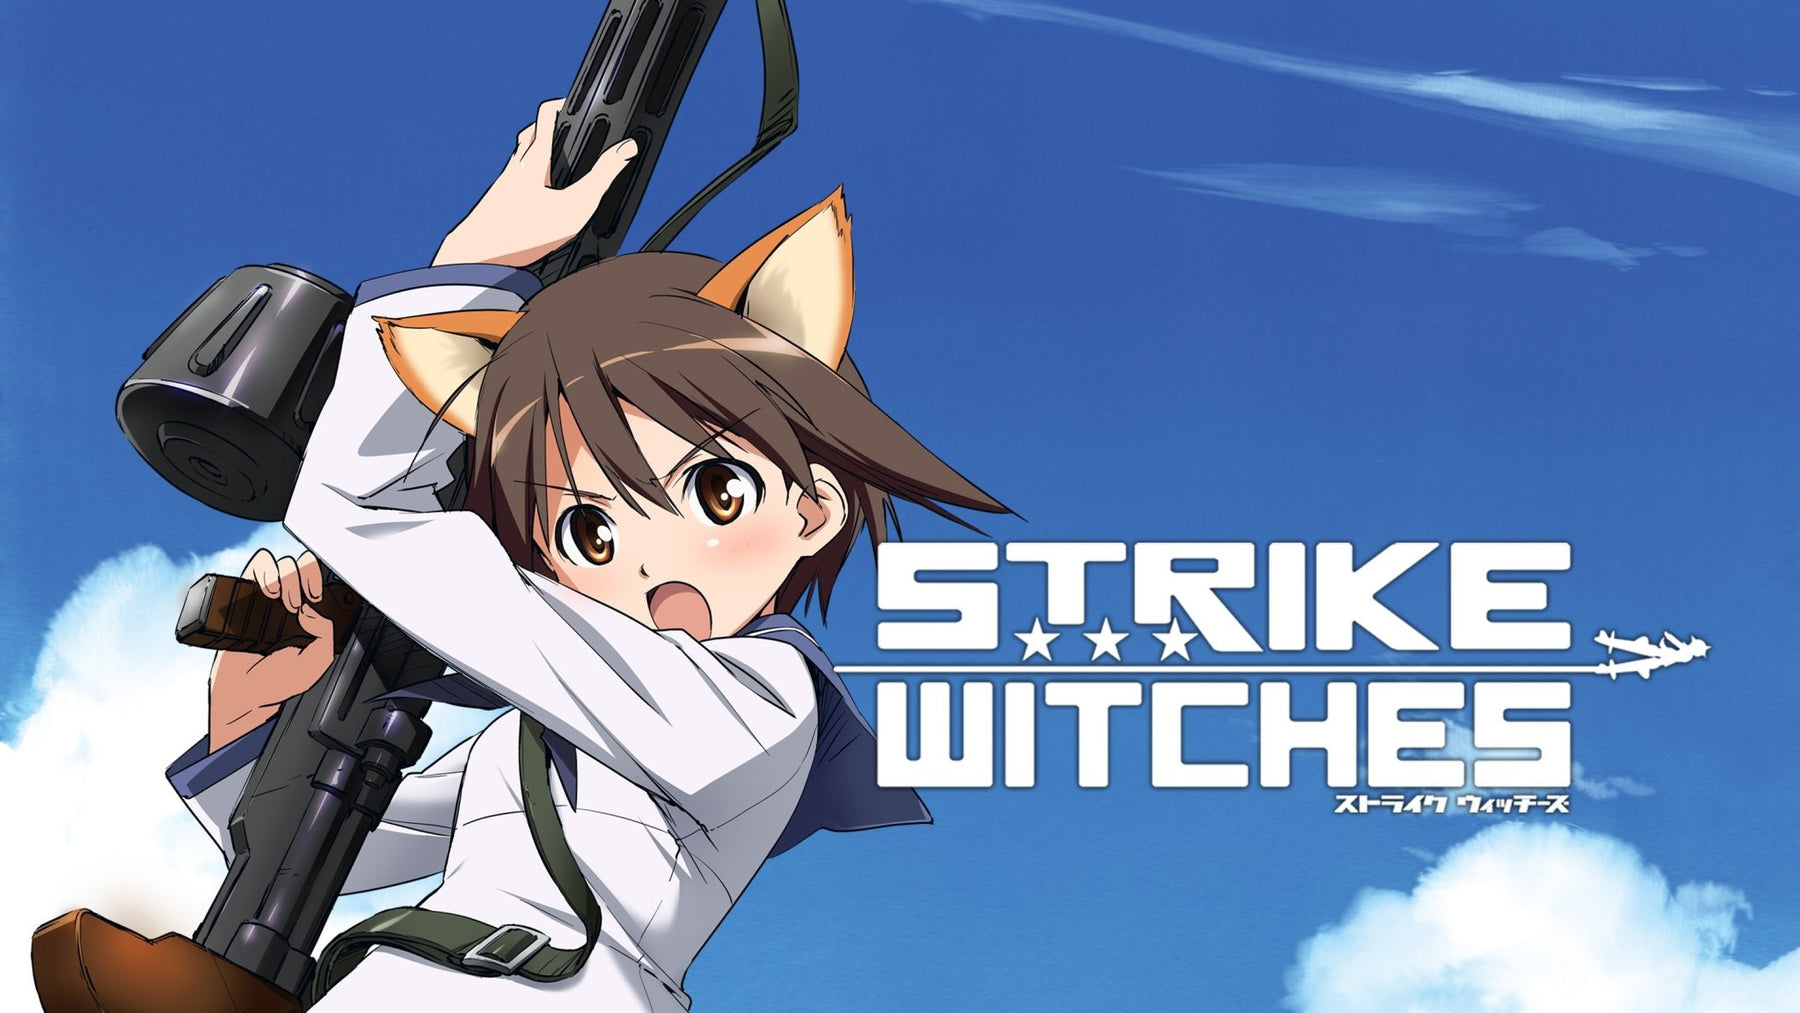 Strike Witches - Road to Berlin Anime Series Premieres on October 7 | Adilsons